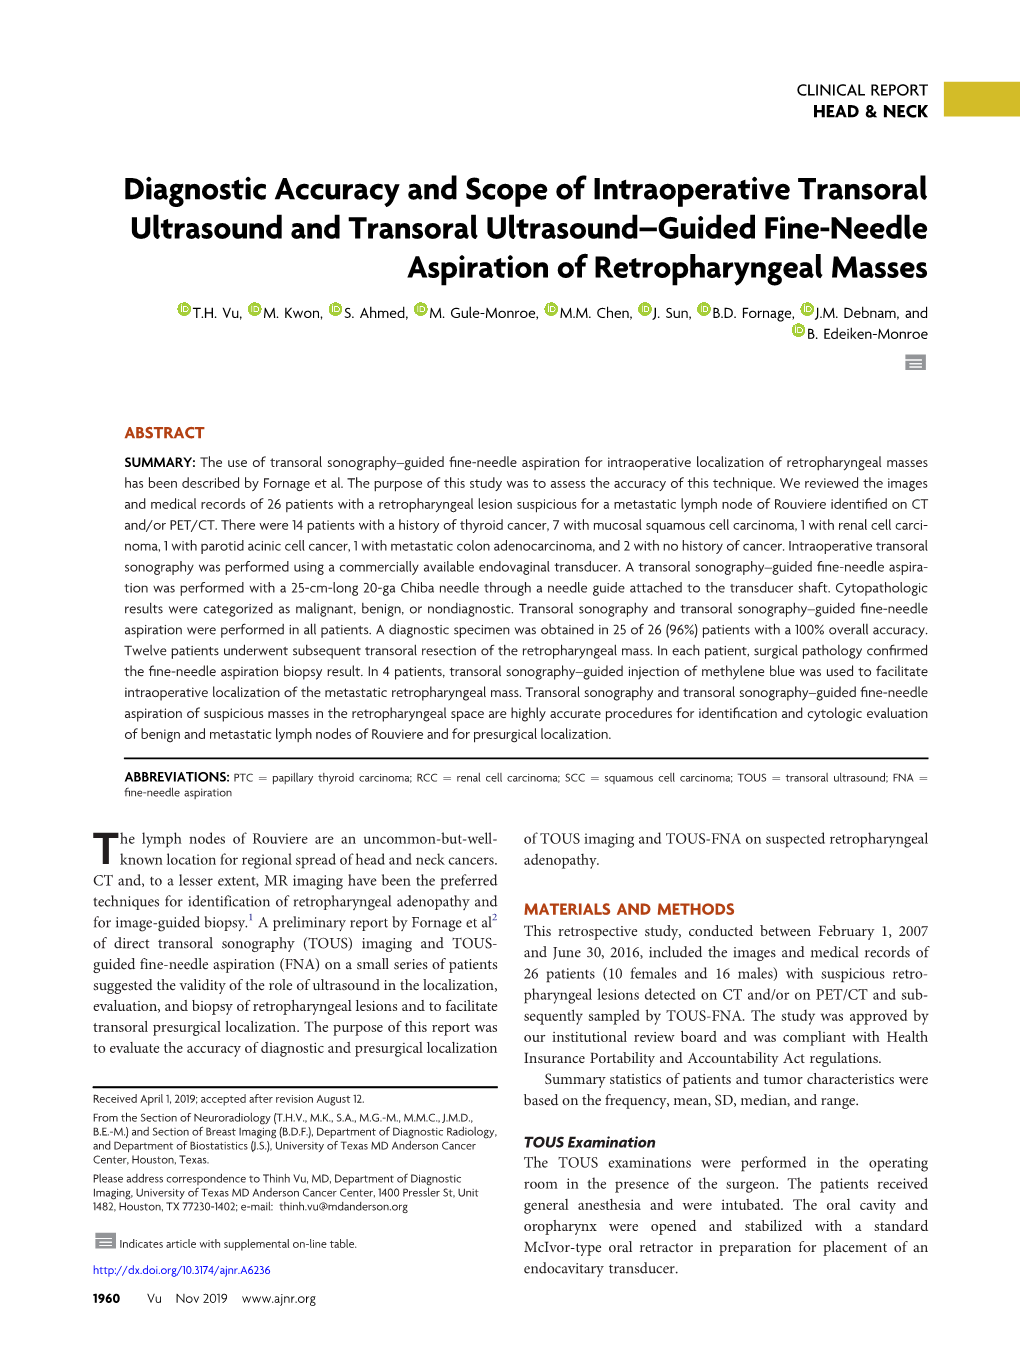 Diagnostic Accuracy and Scope of Intraoperative Transoral Ultrasound and Transoral Ultrasound–Guided Fine-Needle Aspiration of Retropharyngeal Masses